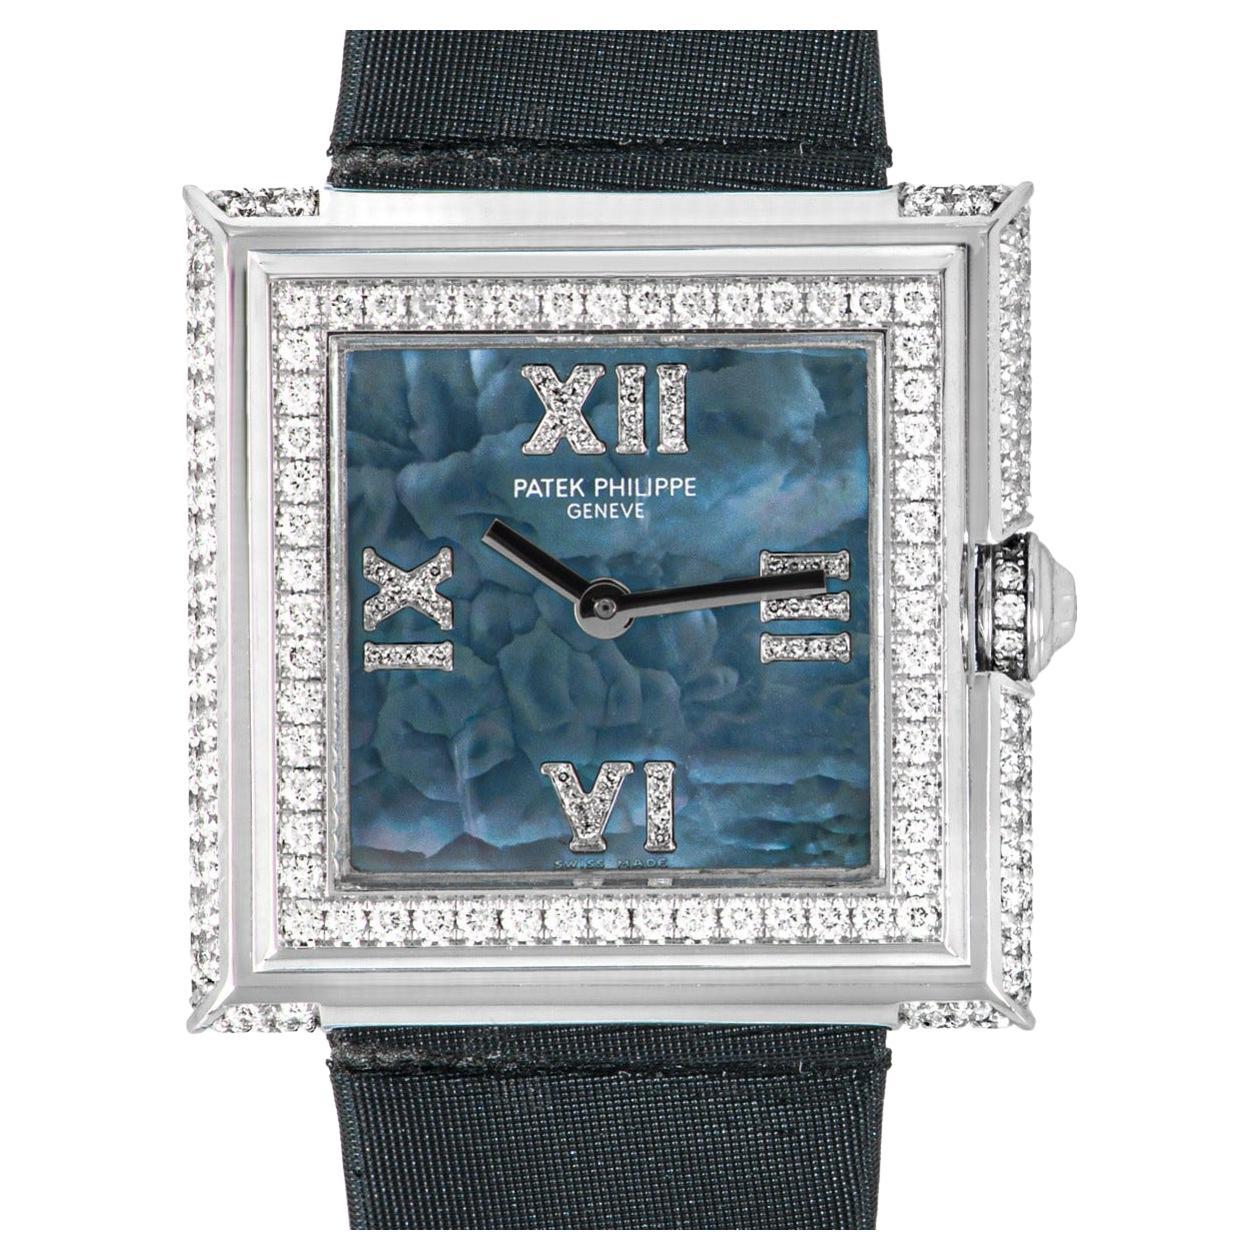 A stunning ladies 28mm Gondolo wristwatch in white gold by Patek Philippe. Featuring a captivating blue mother of pearl dial with diamond set roman numerals. Complimenting the dial is a fixed white gold bezel and case set with approximately 223